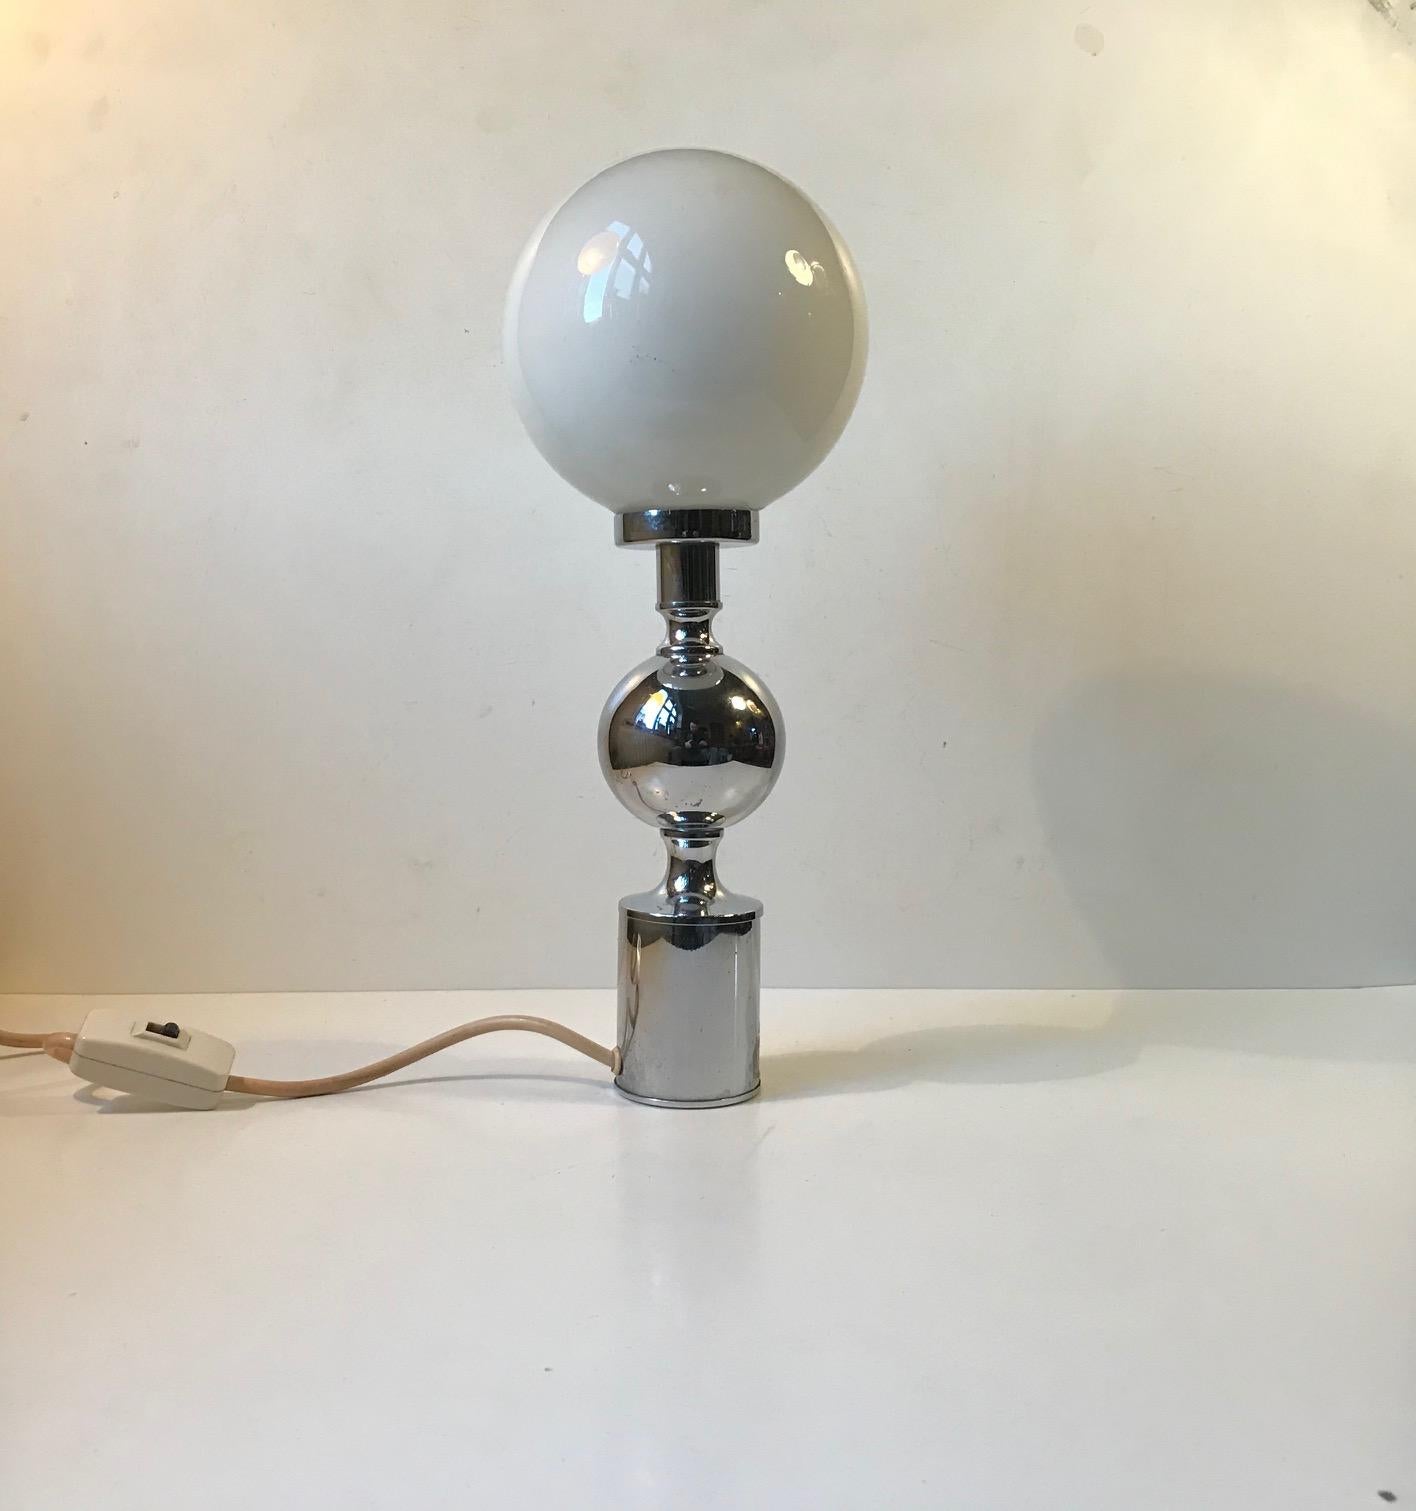 Sculptural chrome-plated table light with opaline glass sphere. Designed and manufactured by Sölken Leuchten in Germany during the 1970s.